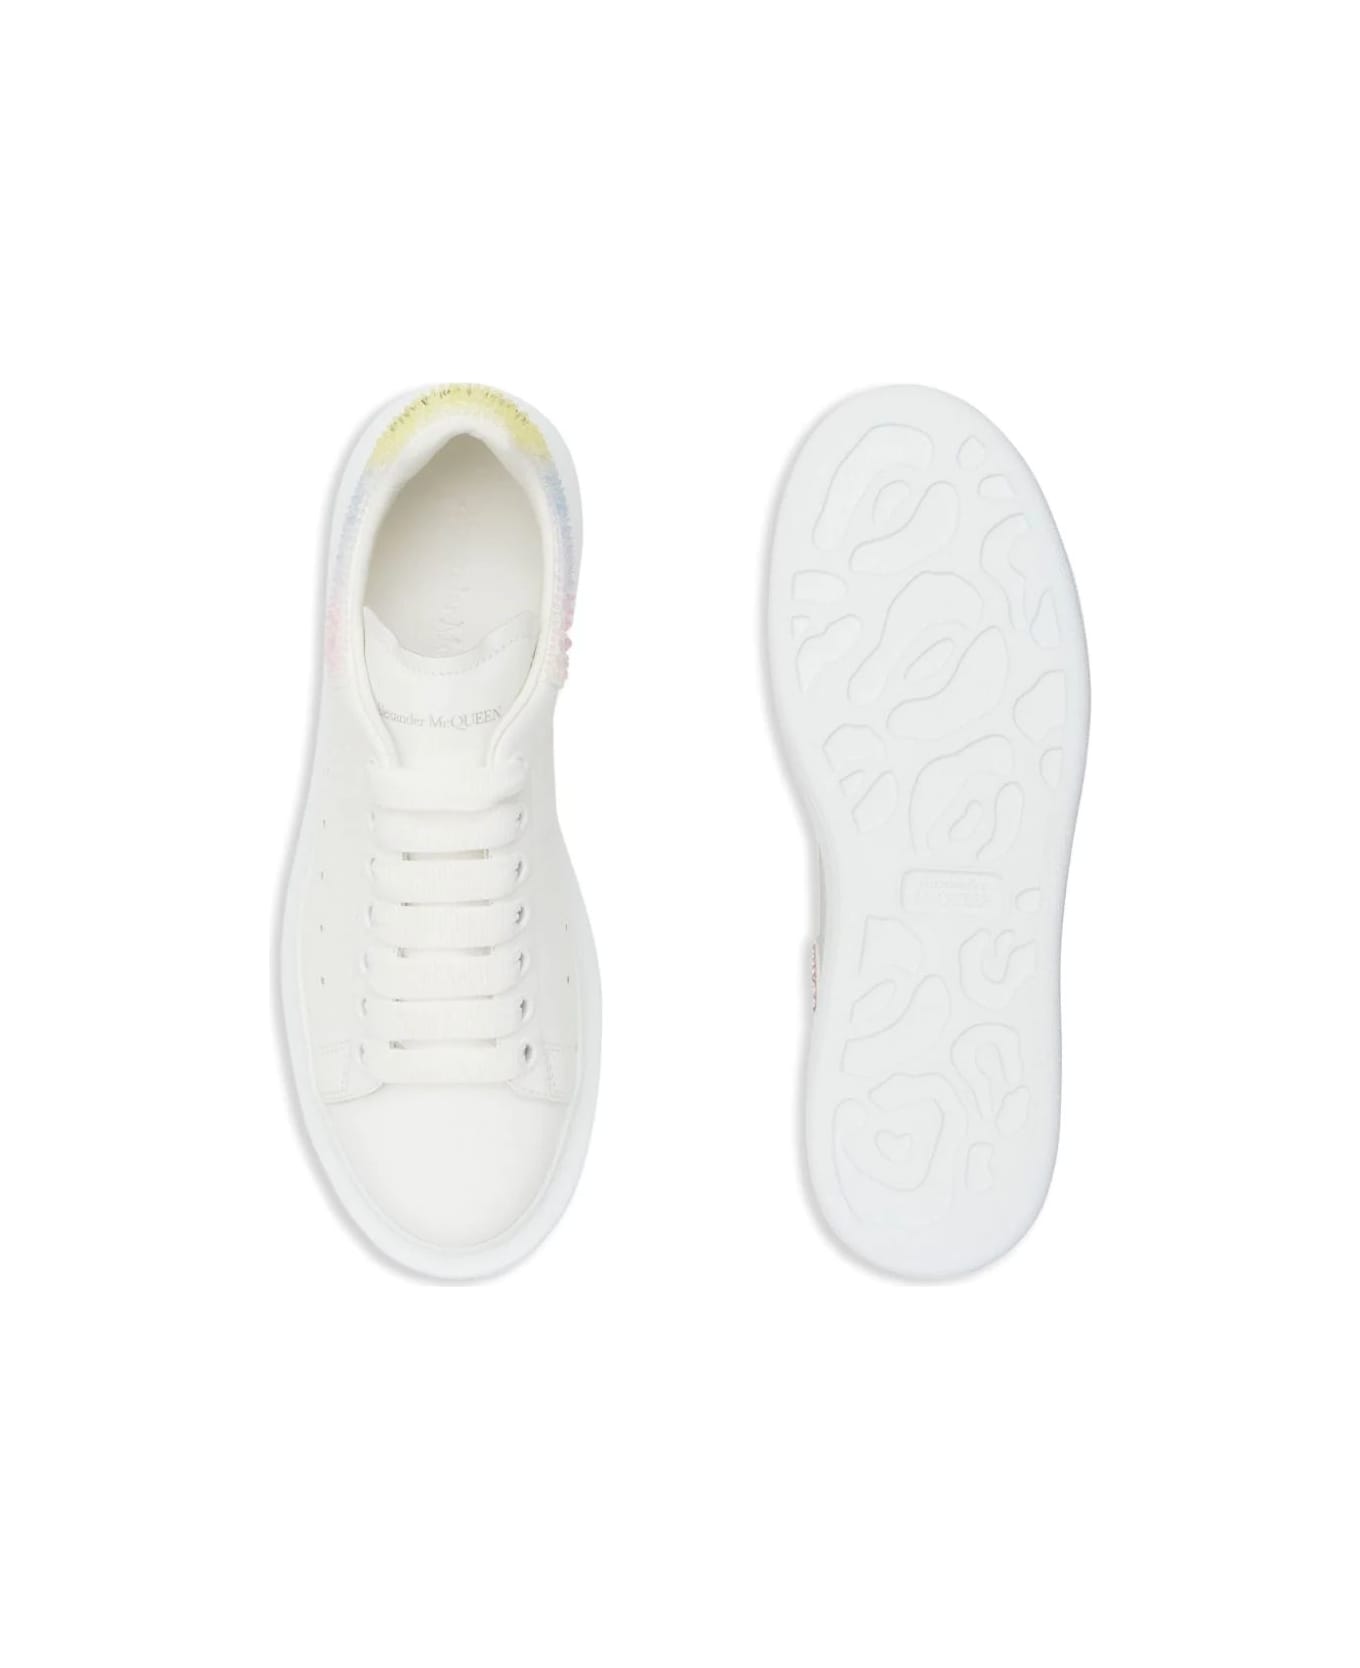 Alexander McQueen White Oversize Sneakers With Multicoloured Spoilers - Bianco ウェッジシューズ